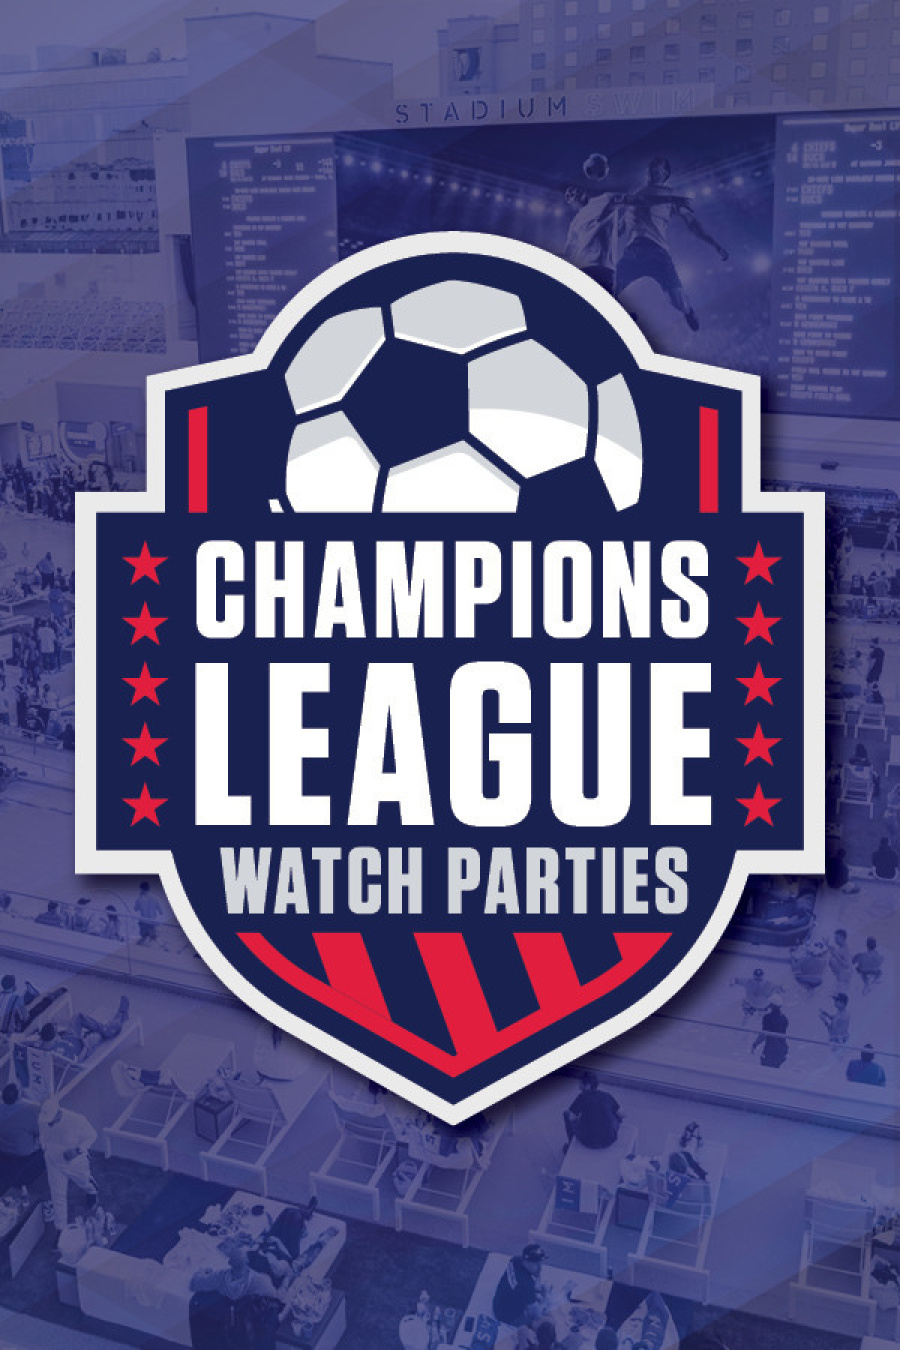 CHAMPIONS LEAGUE WATCH PARTIES